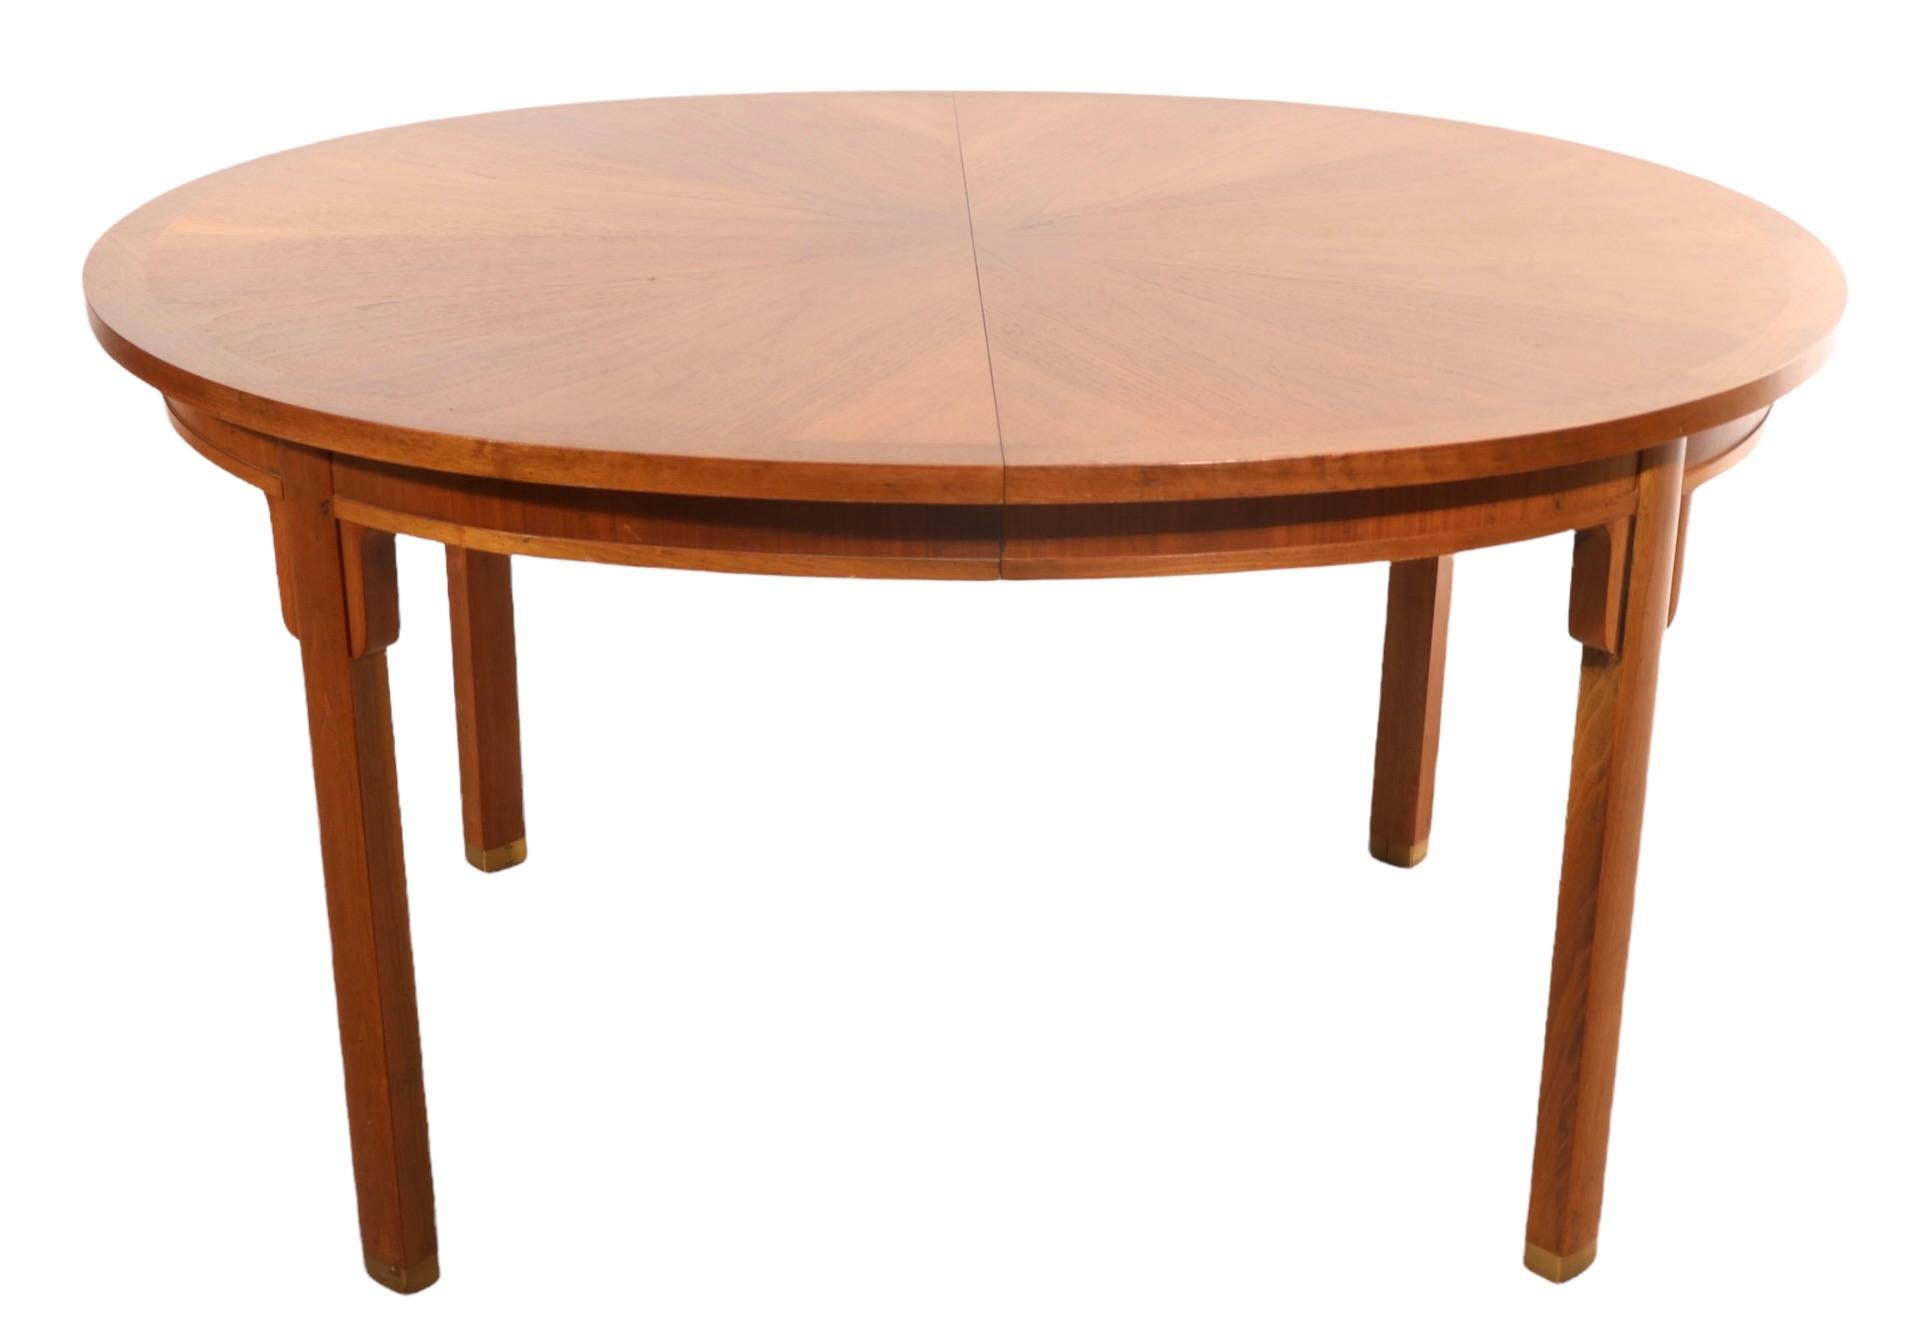 American Chinese Asia Modern Style Dining Table by Milling Road Baker Furniture Company 